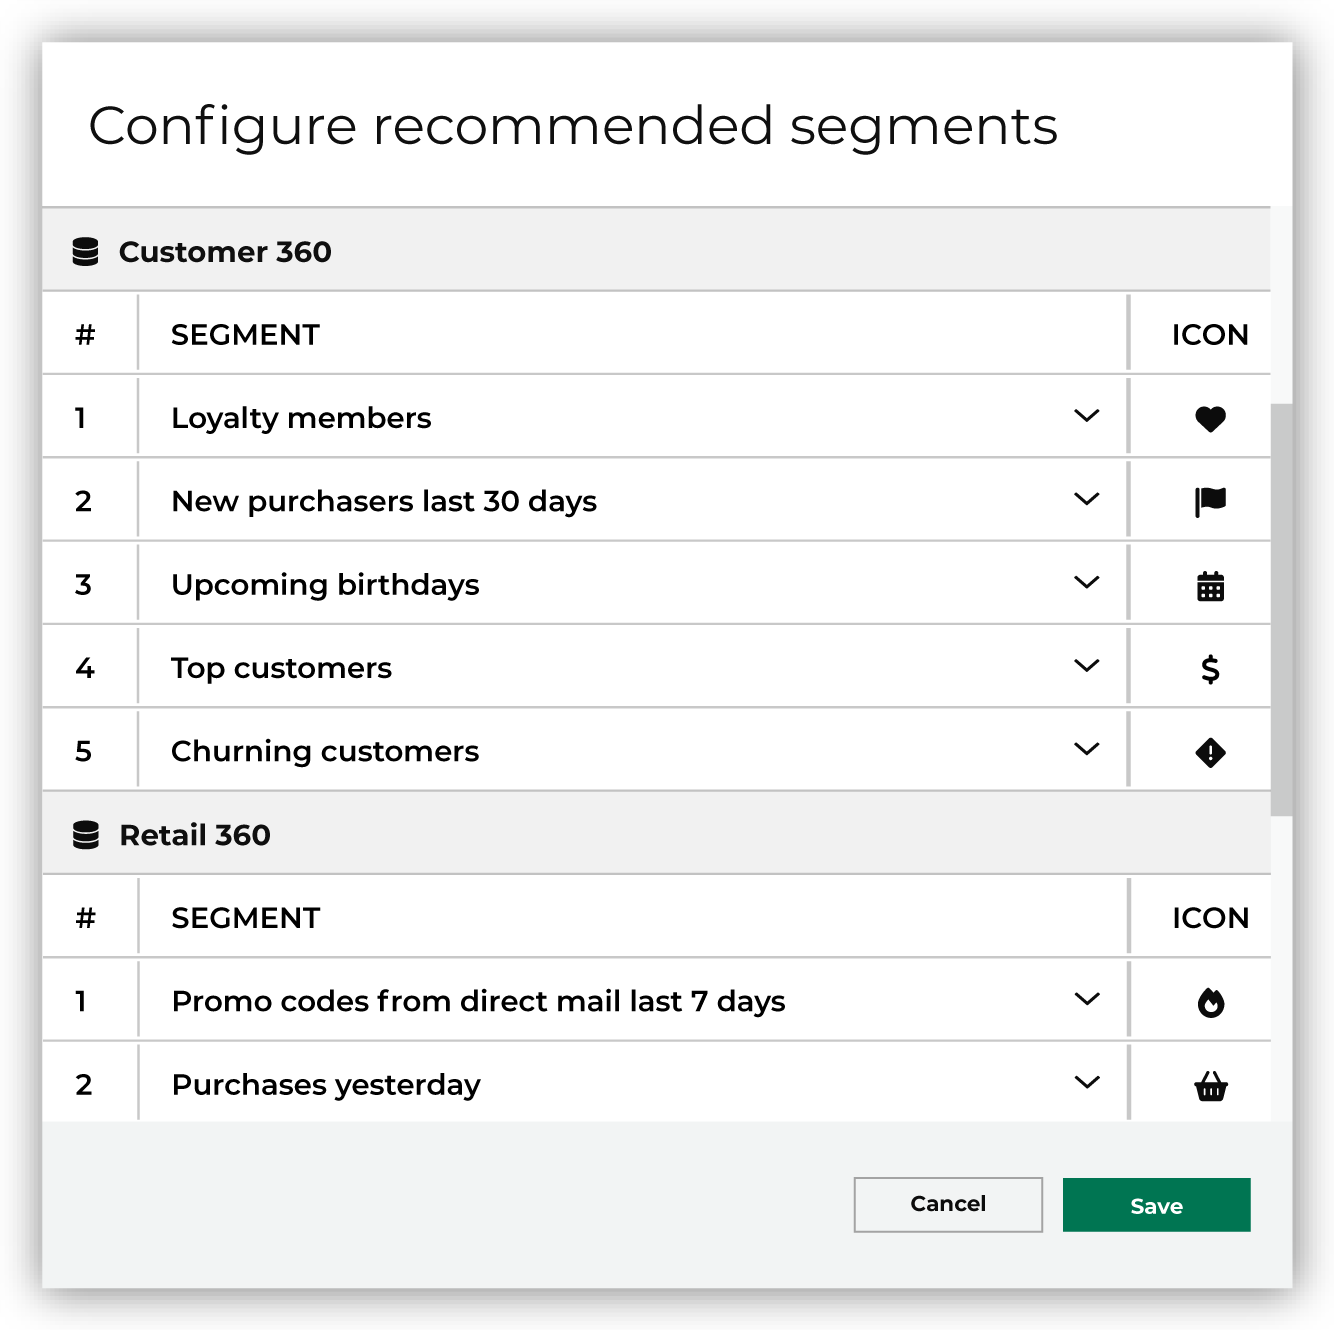 Select an icon to associate with each recommended segment.